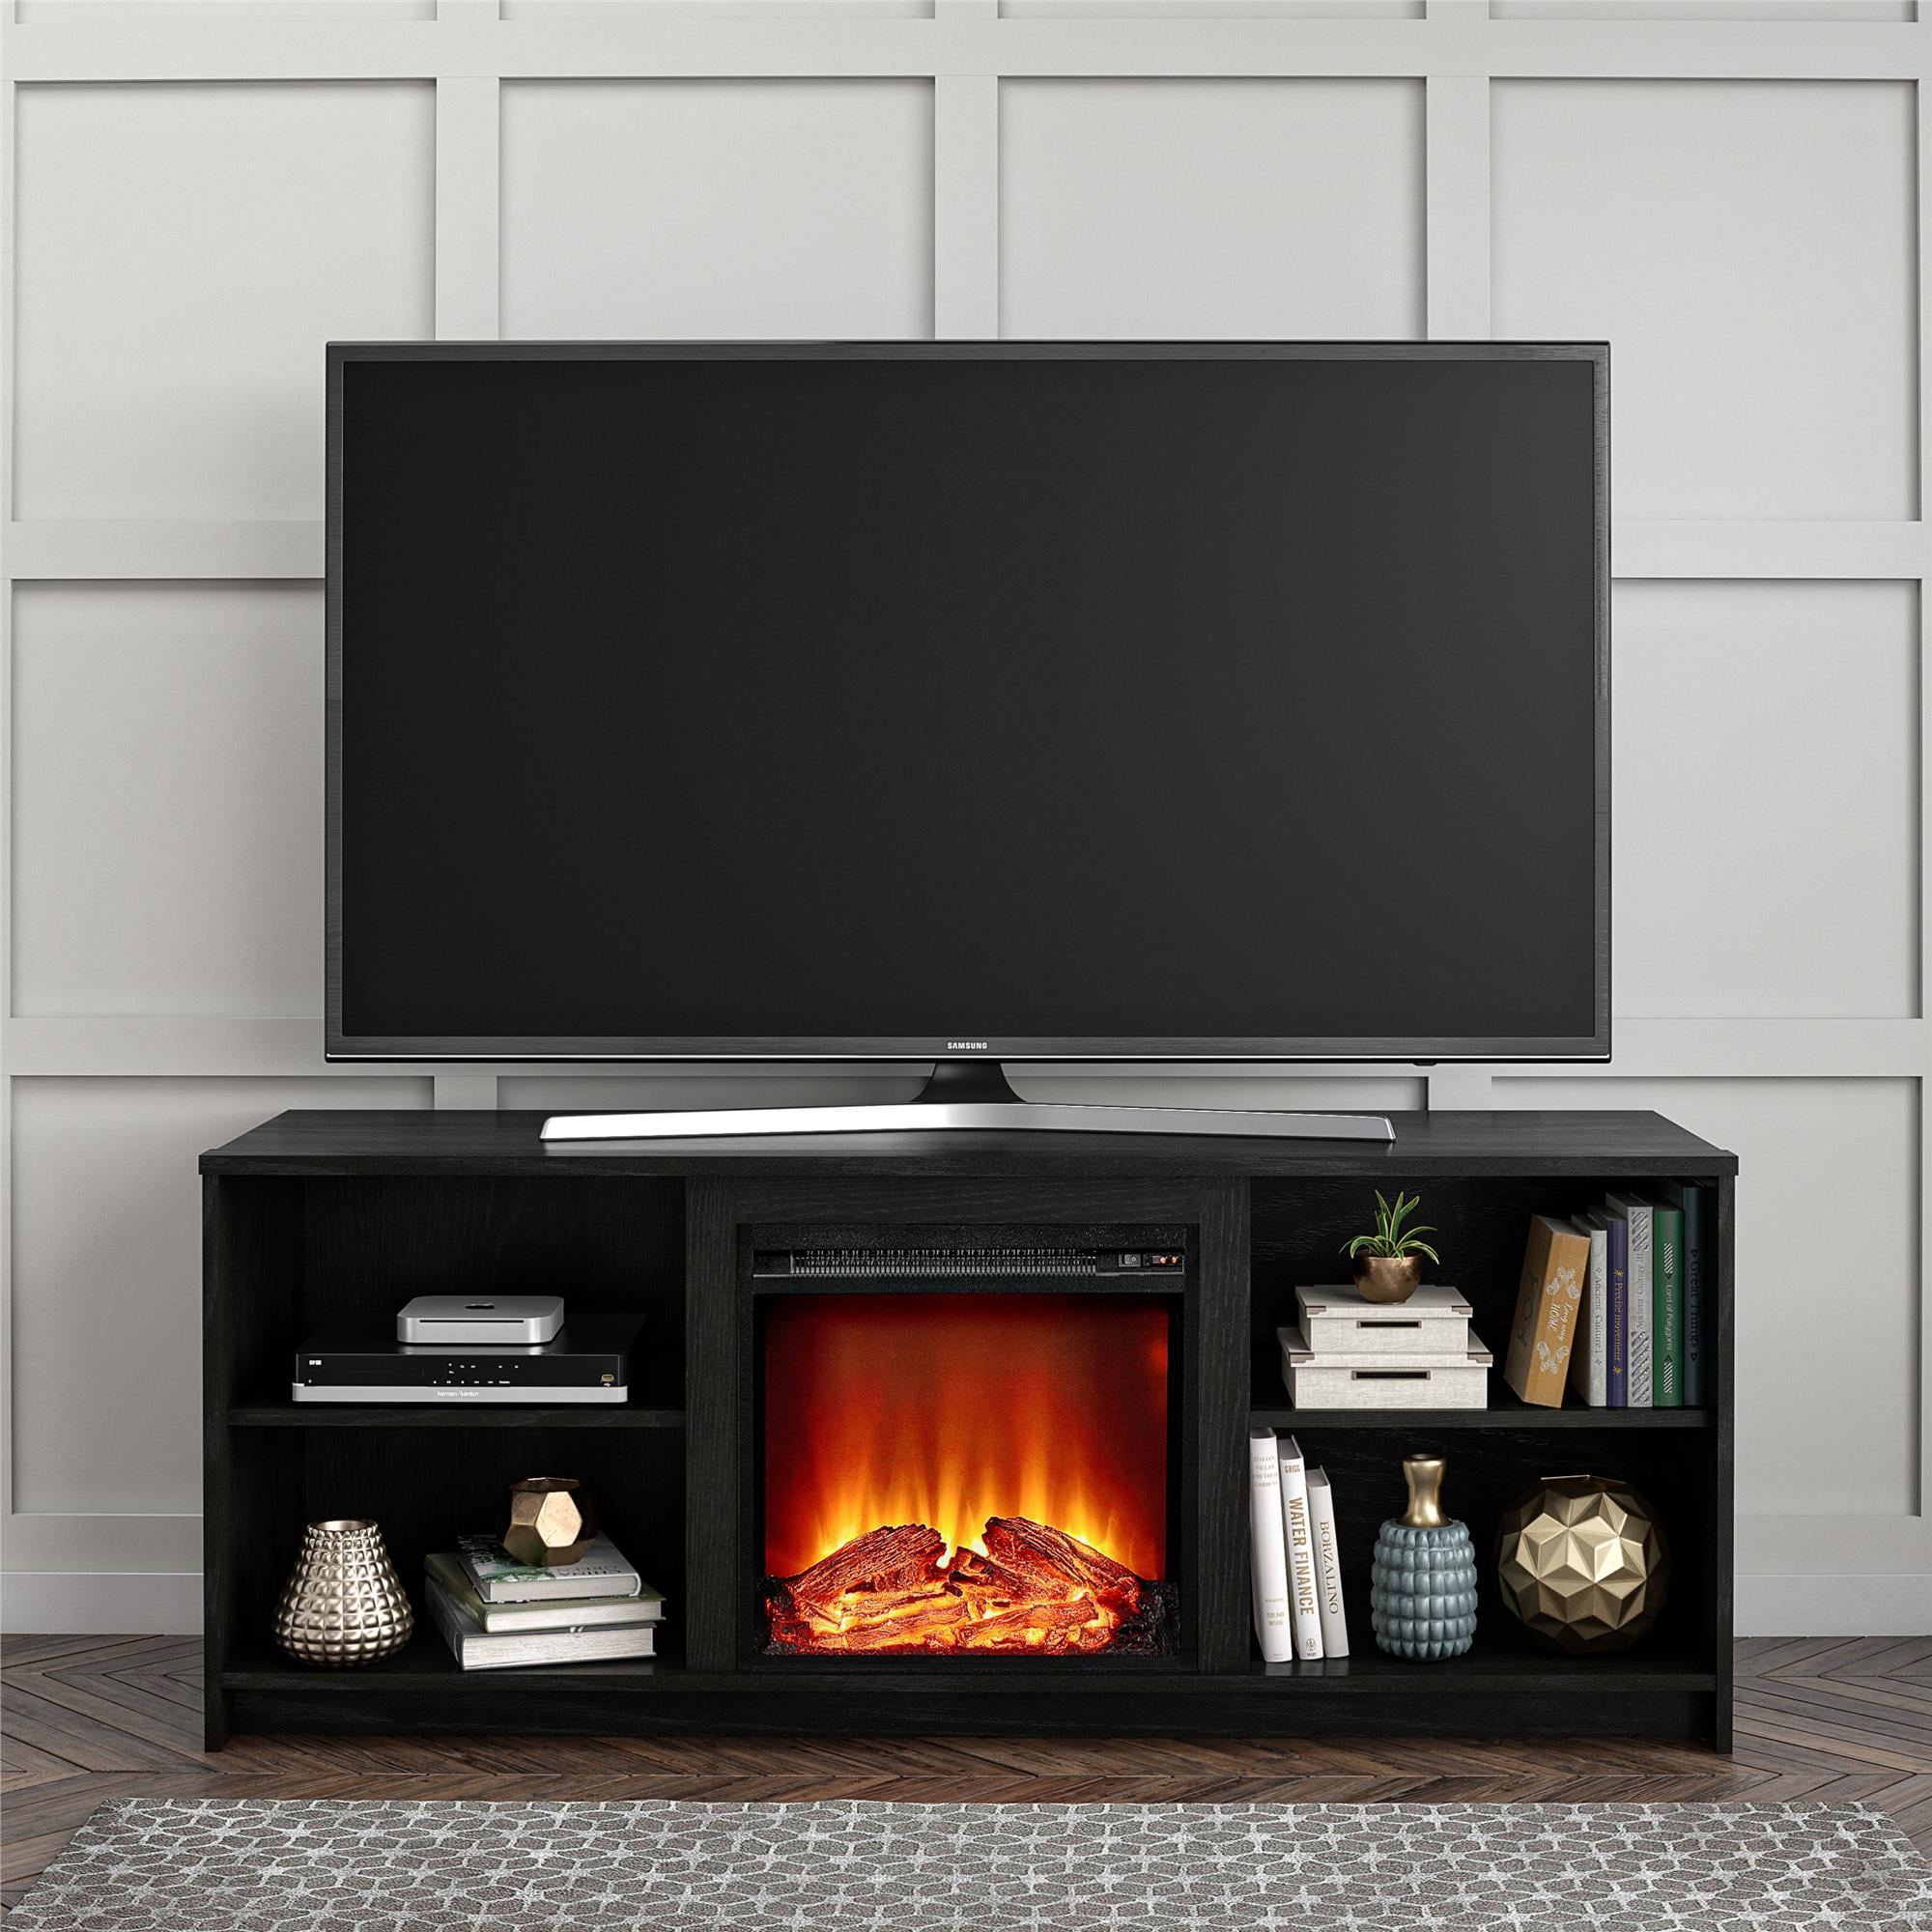 Mainstays Fireplace Tv Stand For Tvs Up, Light Oak Electric Fireplace Entertainment Center